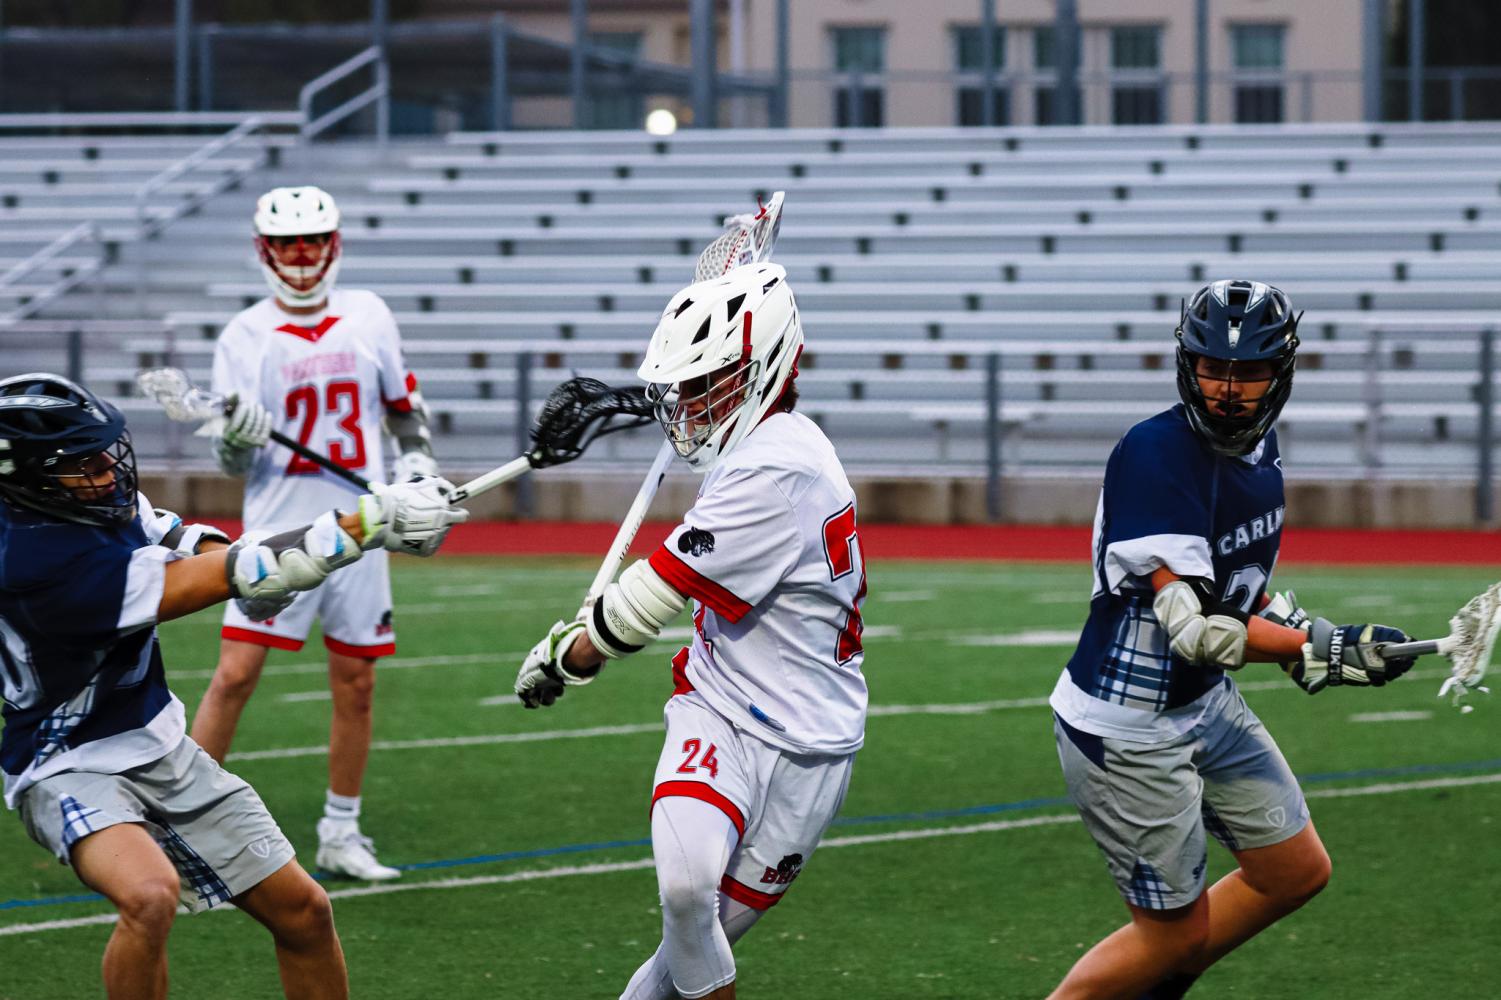 Boys+varsity+lacrosse+clinches+emphatic+first+win+in+league+play